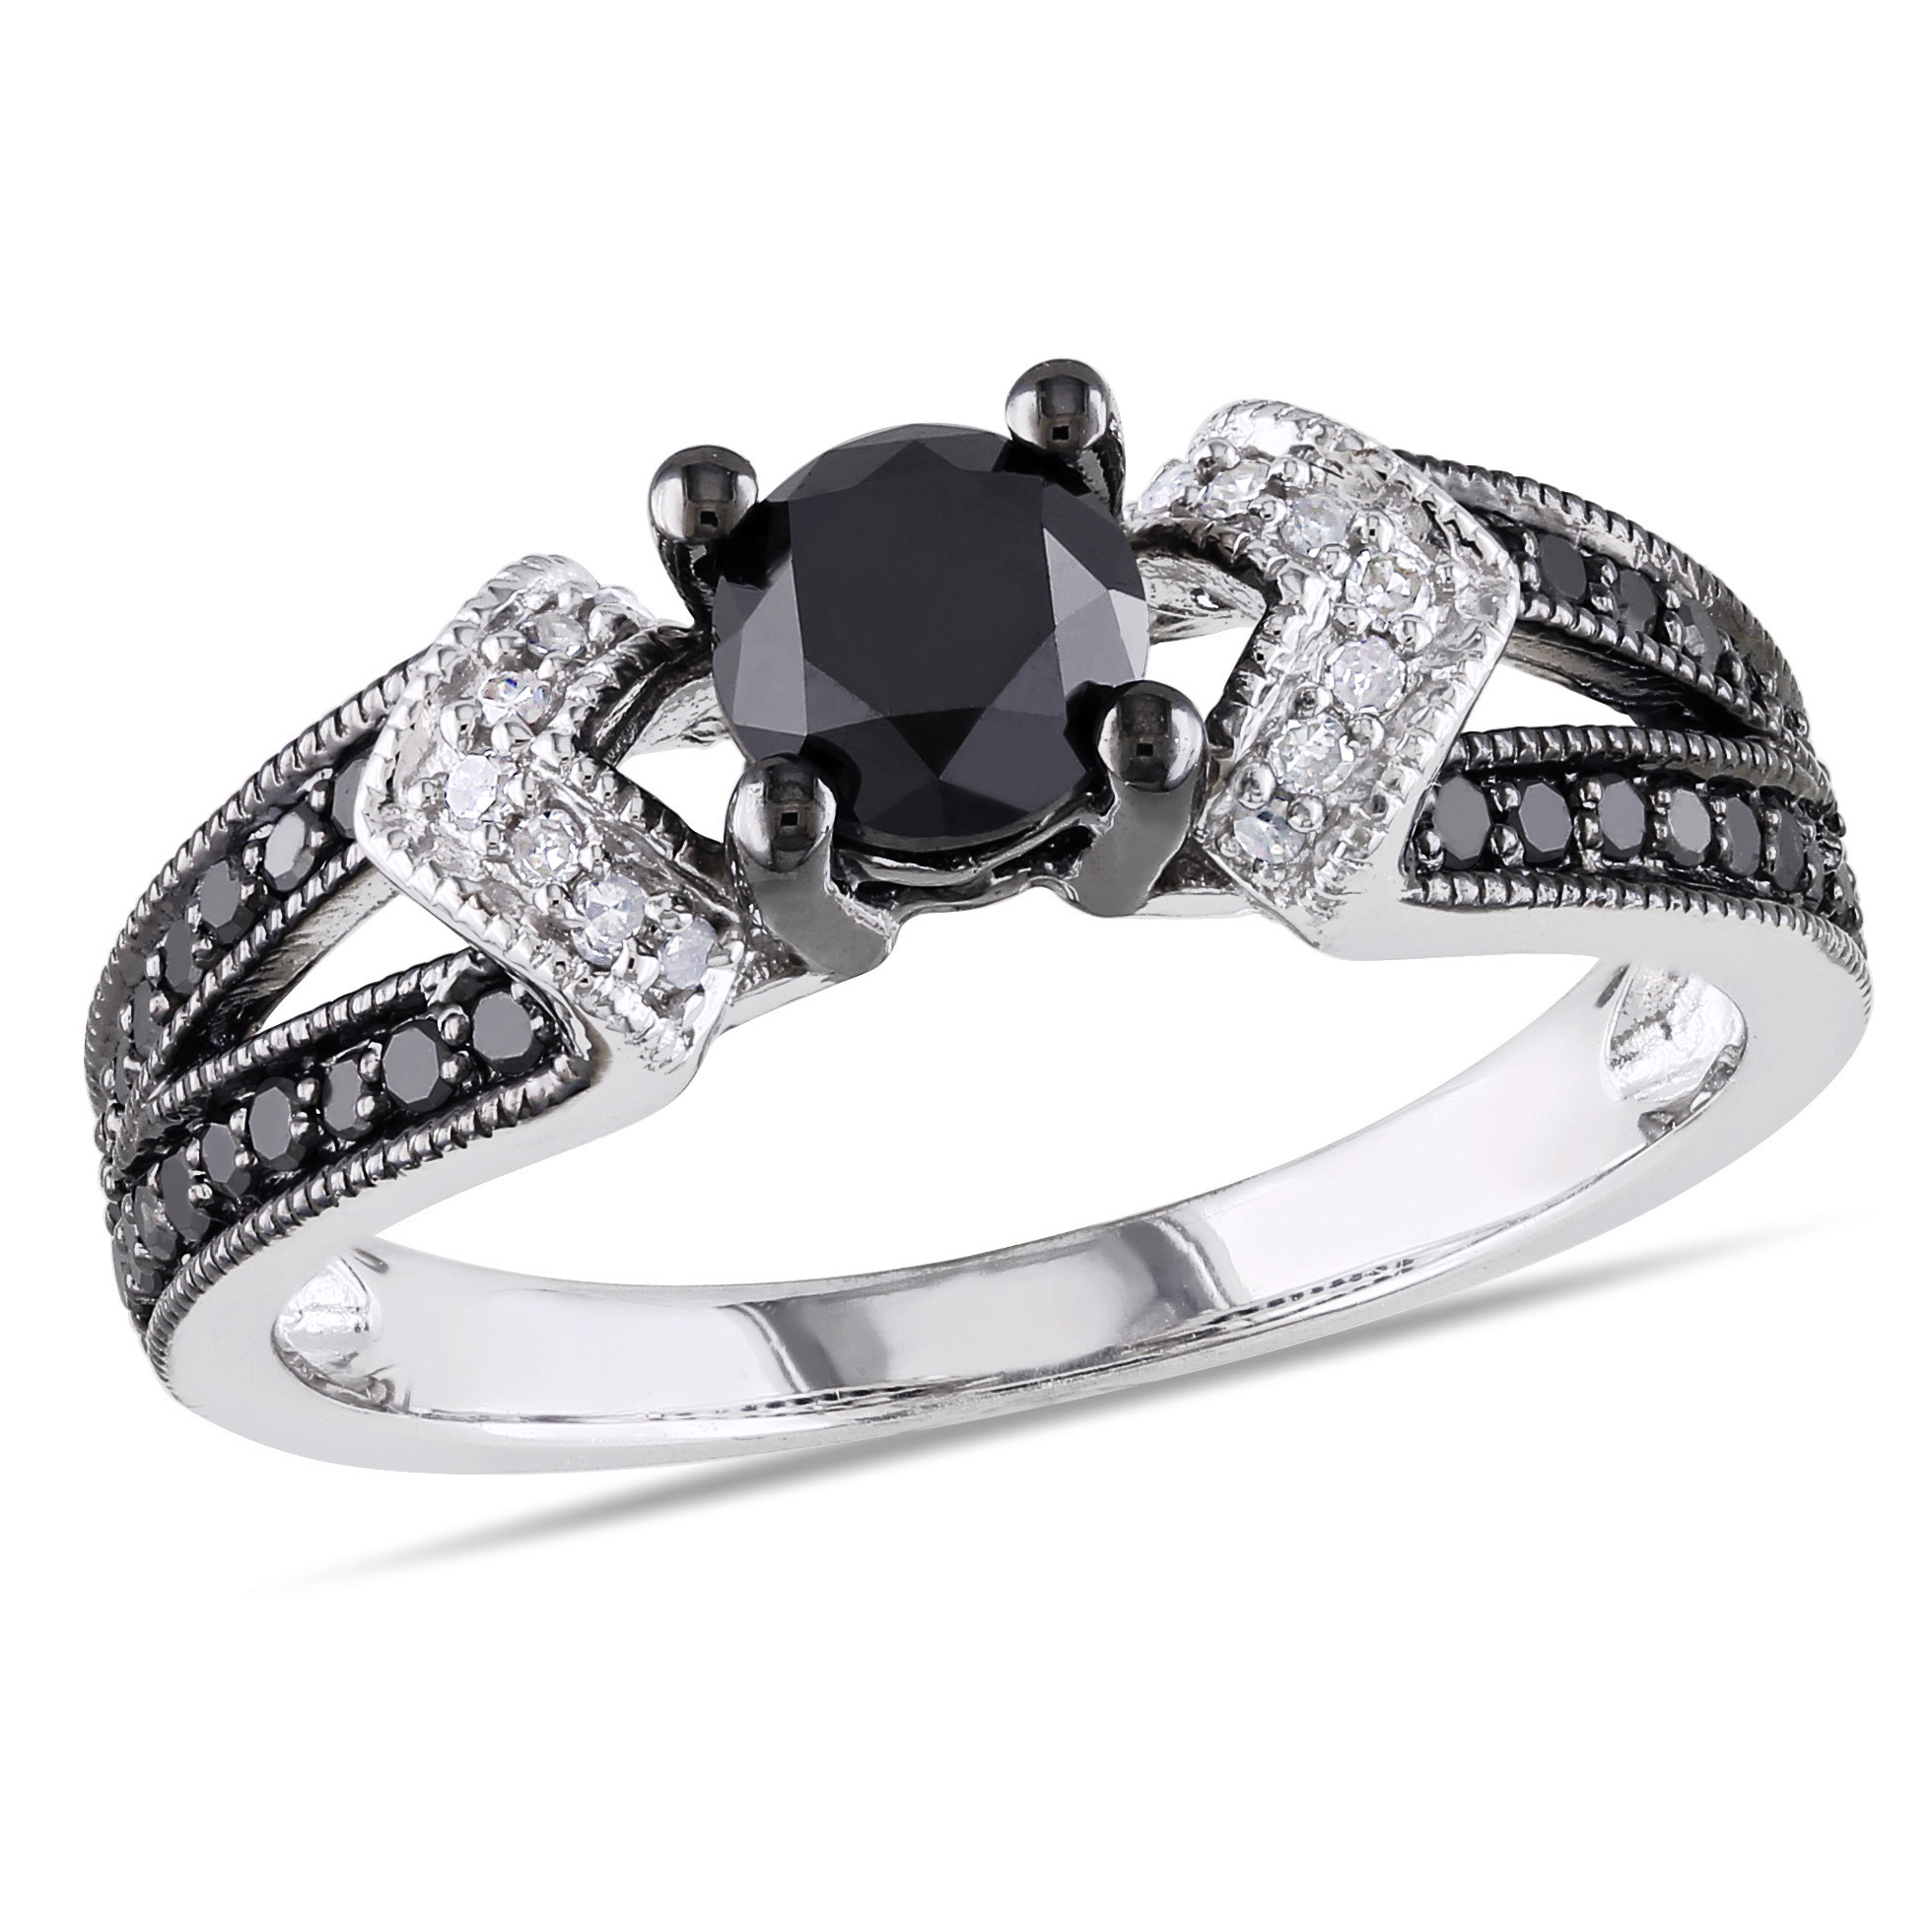 1 Cttw. Sterling Silver Black and White Diamond Engagement Ring (G-H  I2-I3)